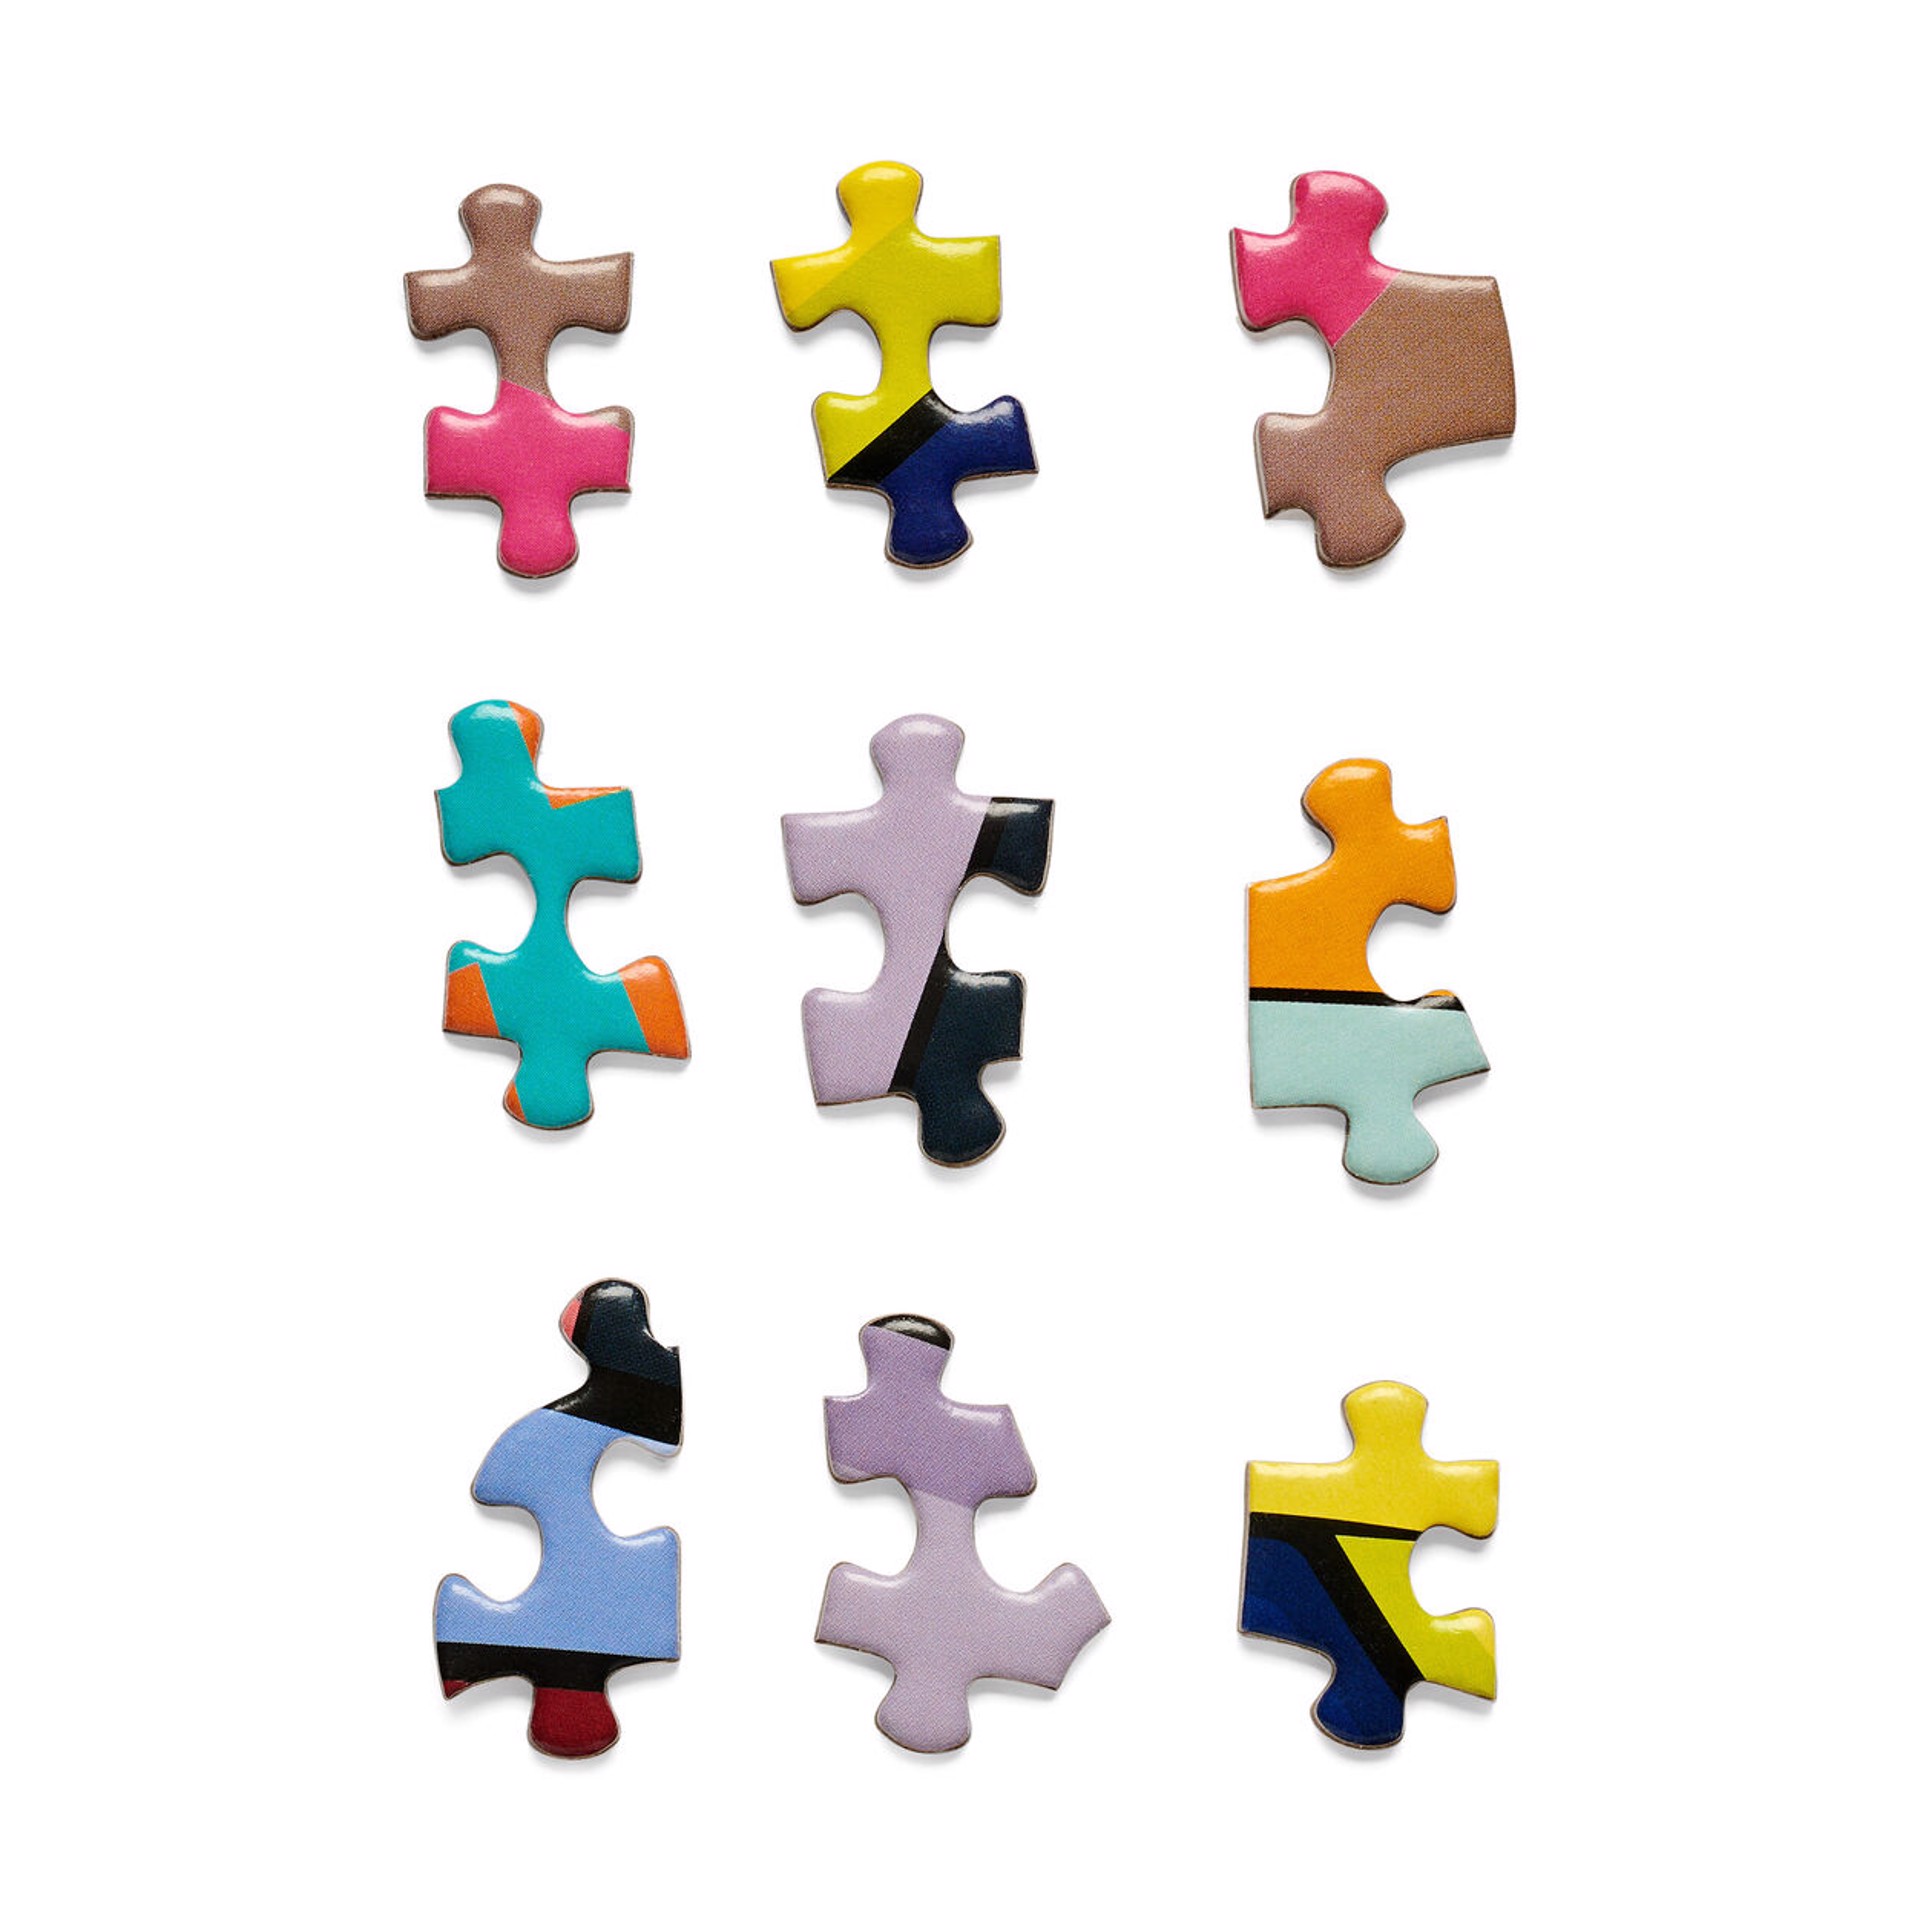 No One's Home 1000 Piece Jigsaw Puzzle by KAWS